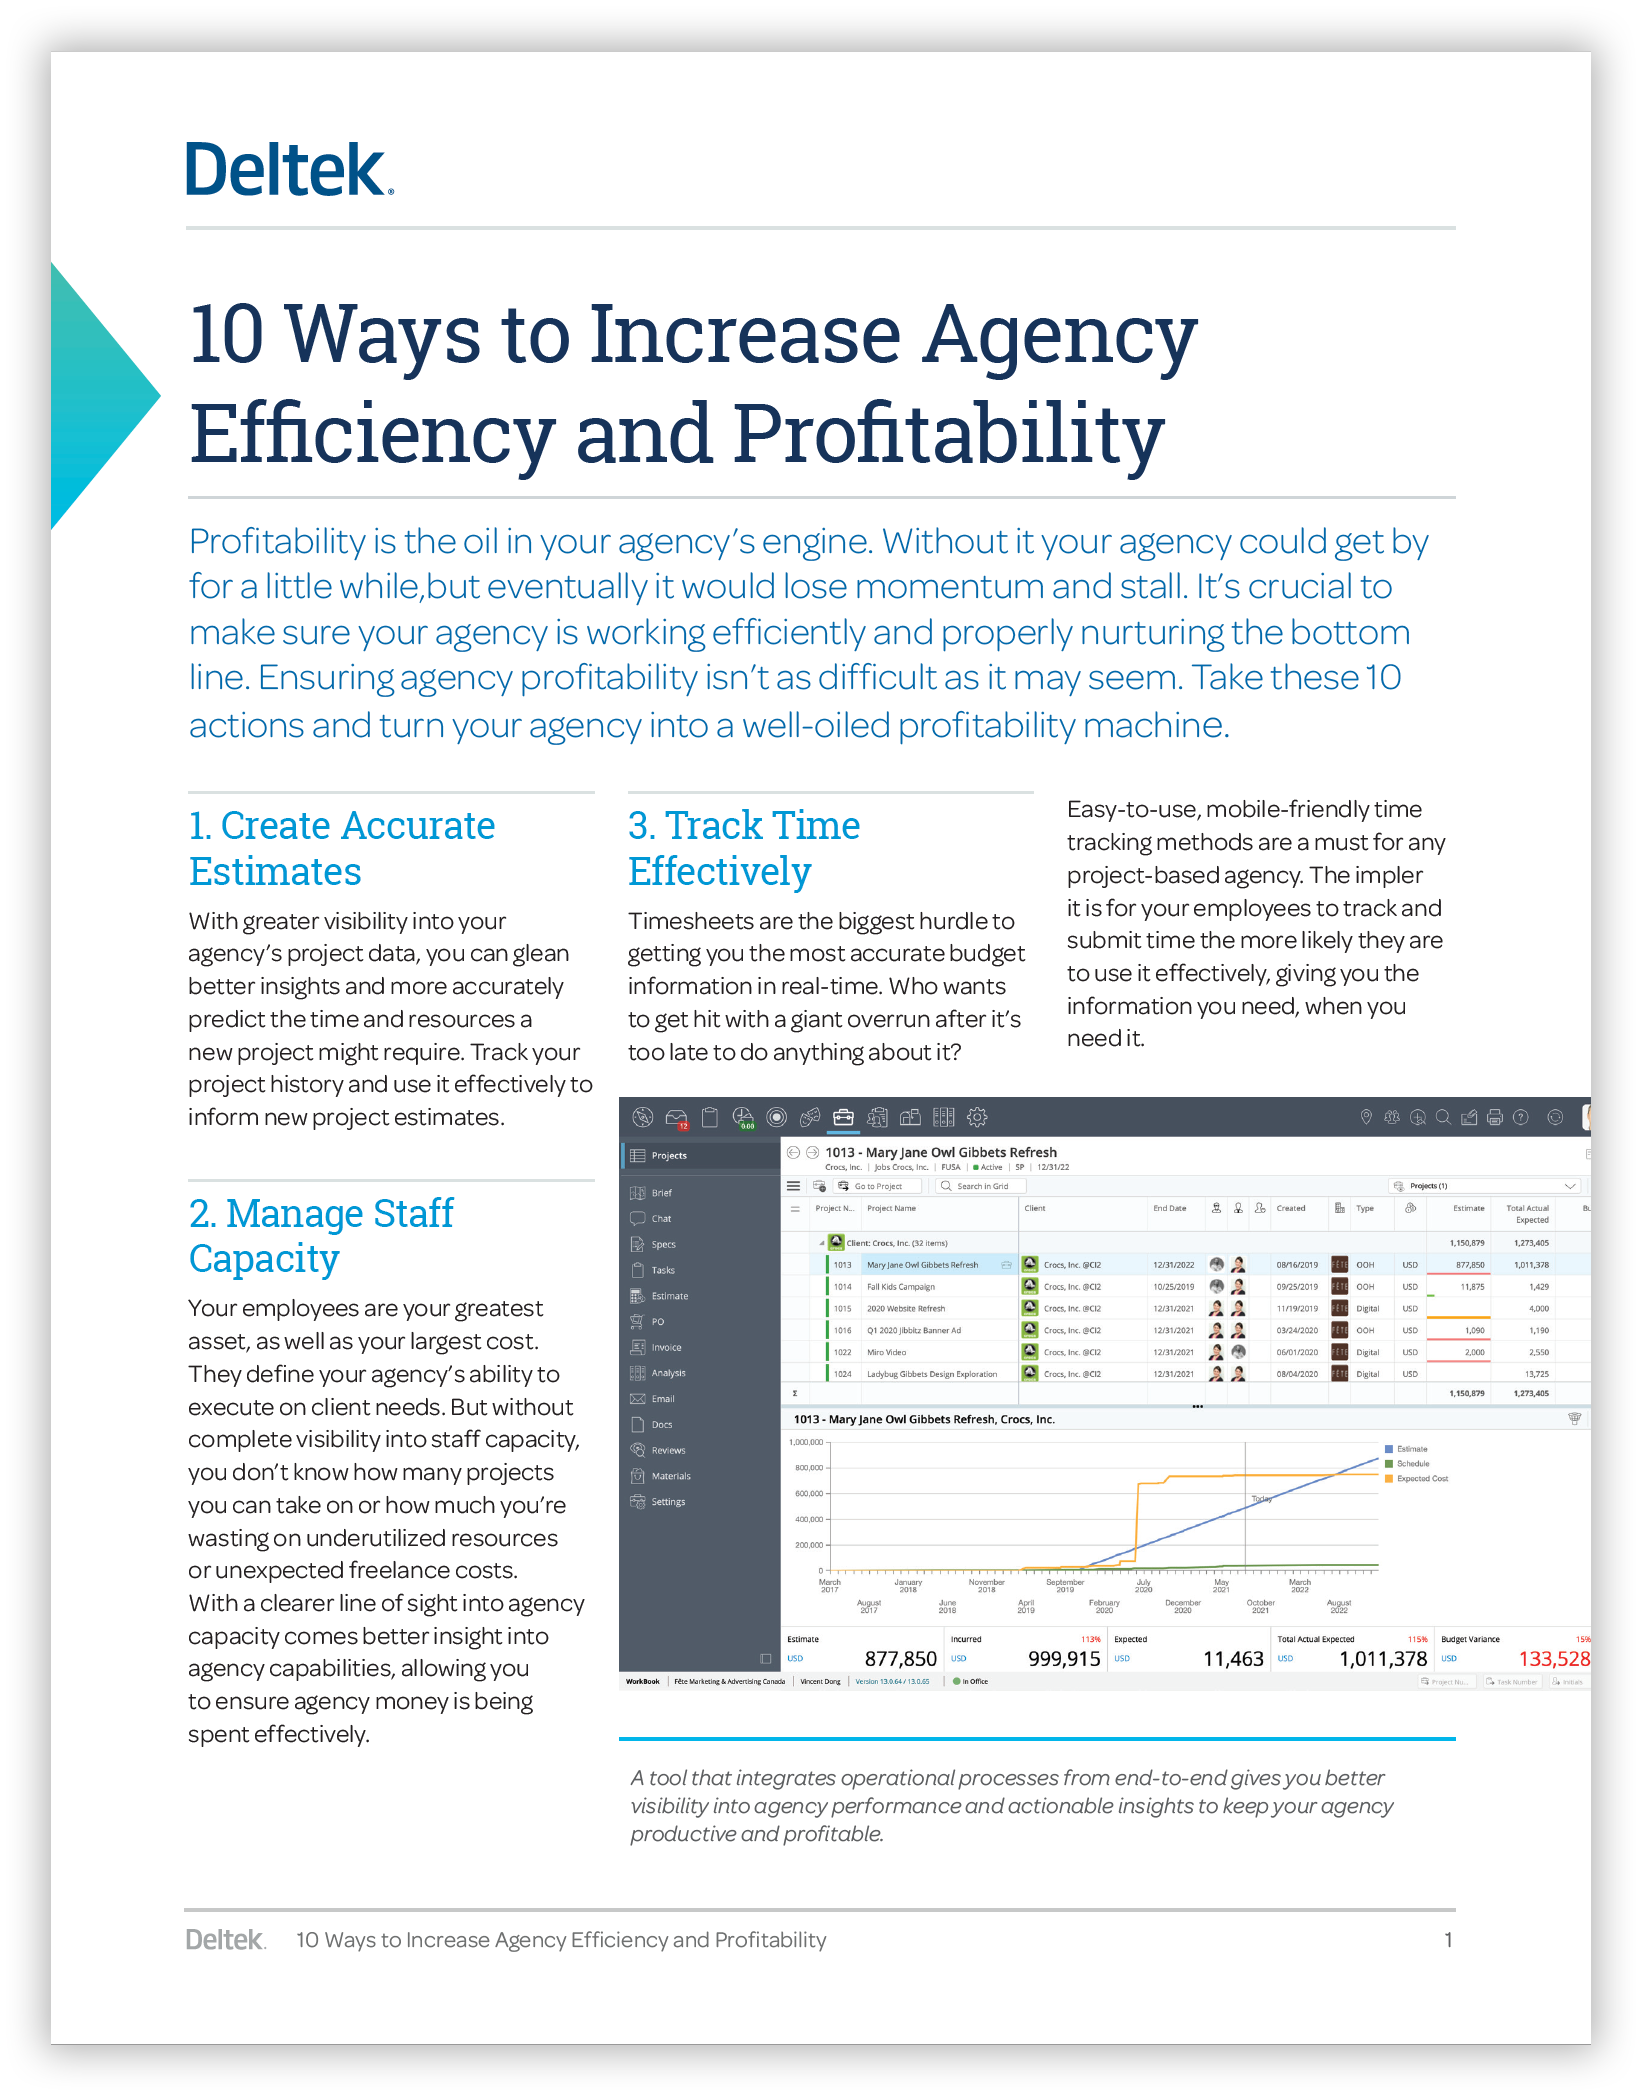 10 Ways to Increase Agency Efficiency and Profitability